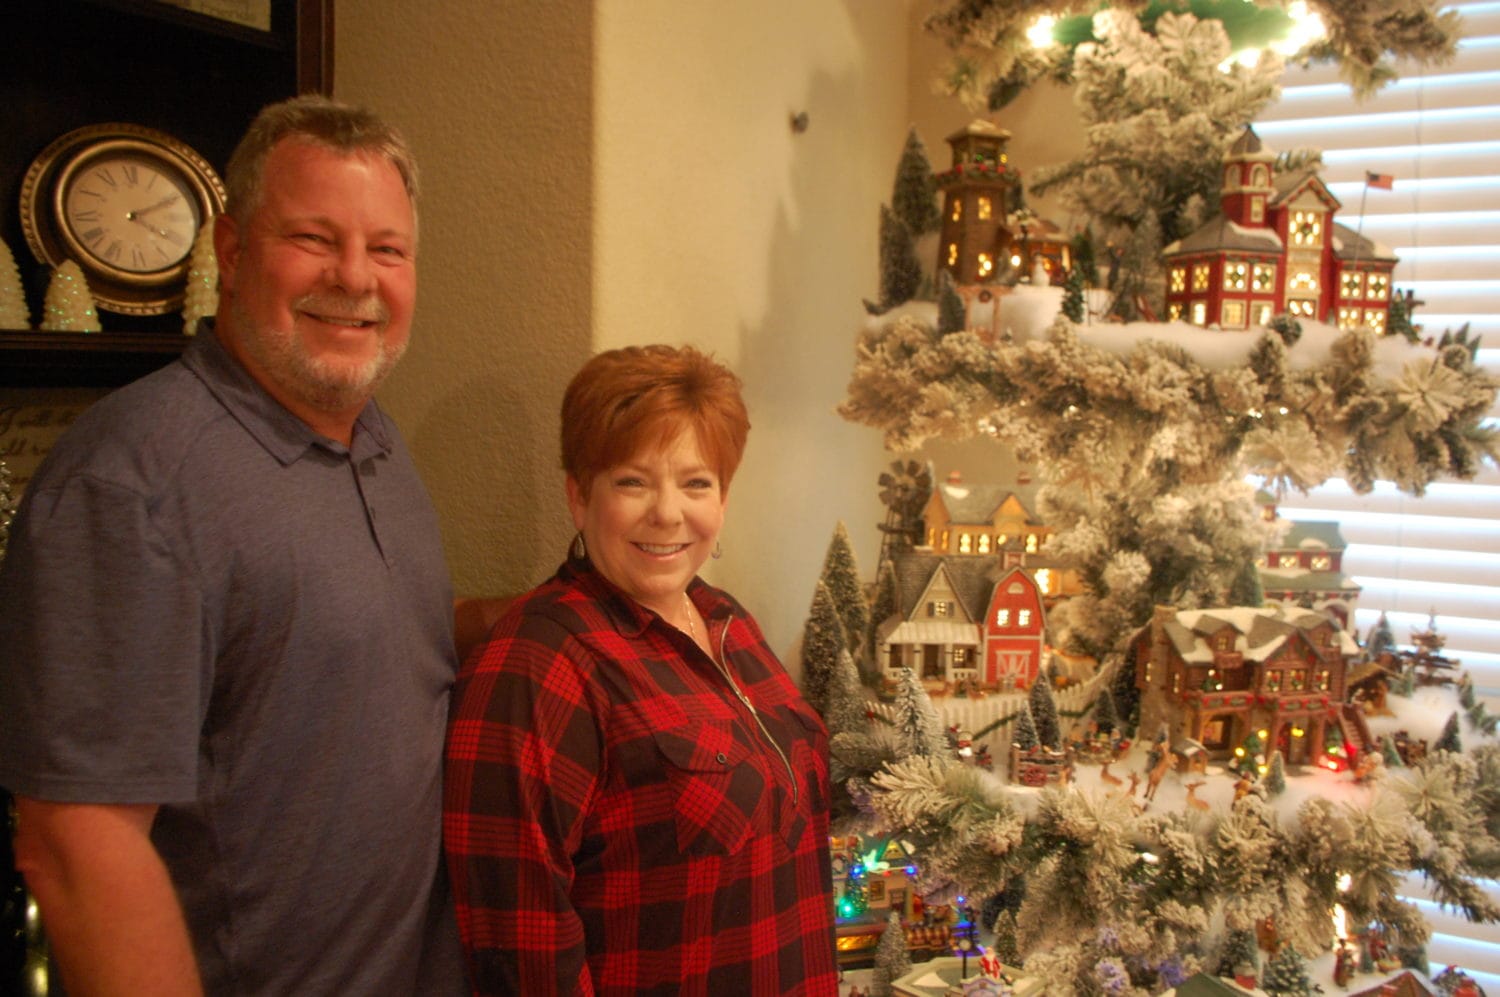 The Christmas Tree Village That Went Viral